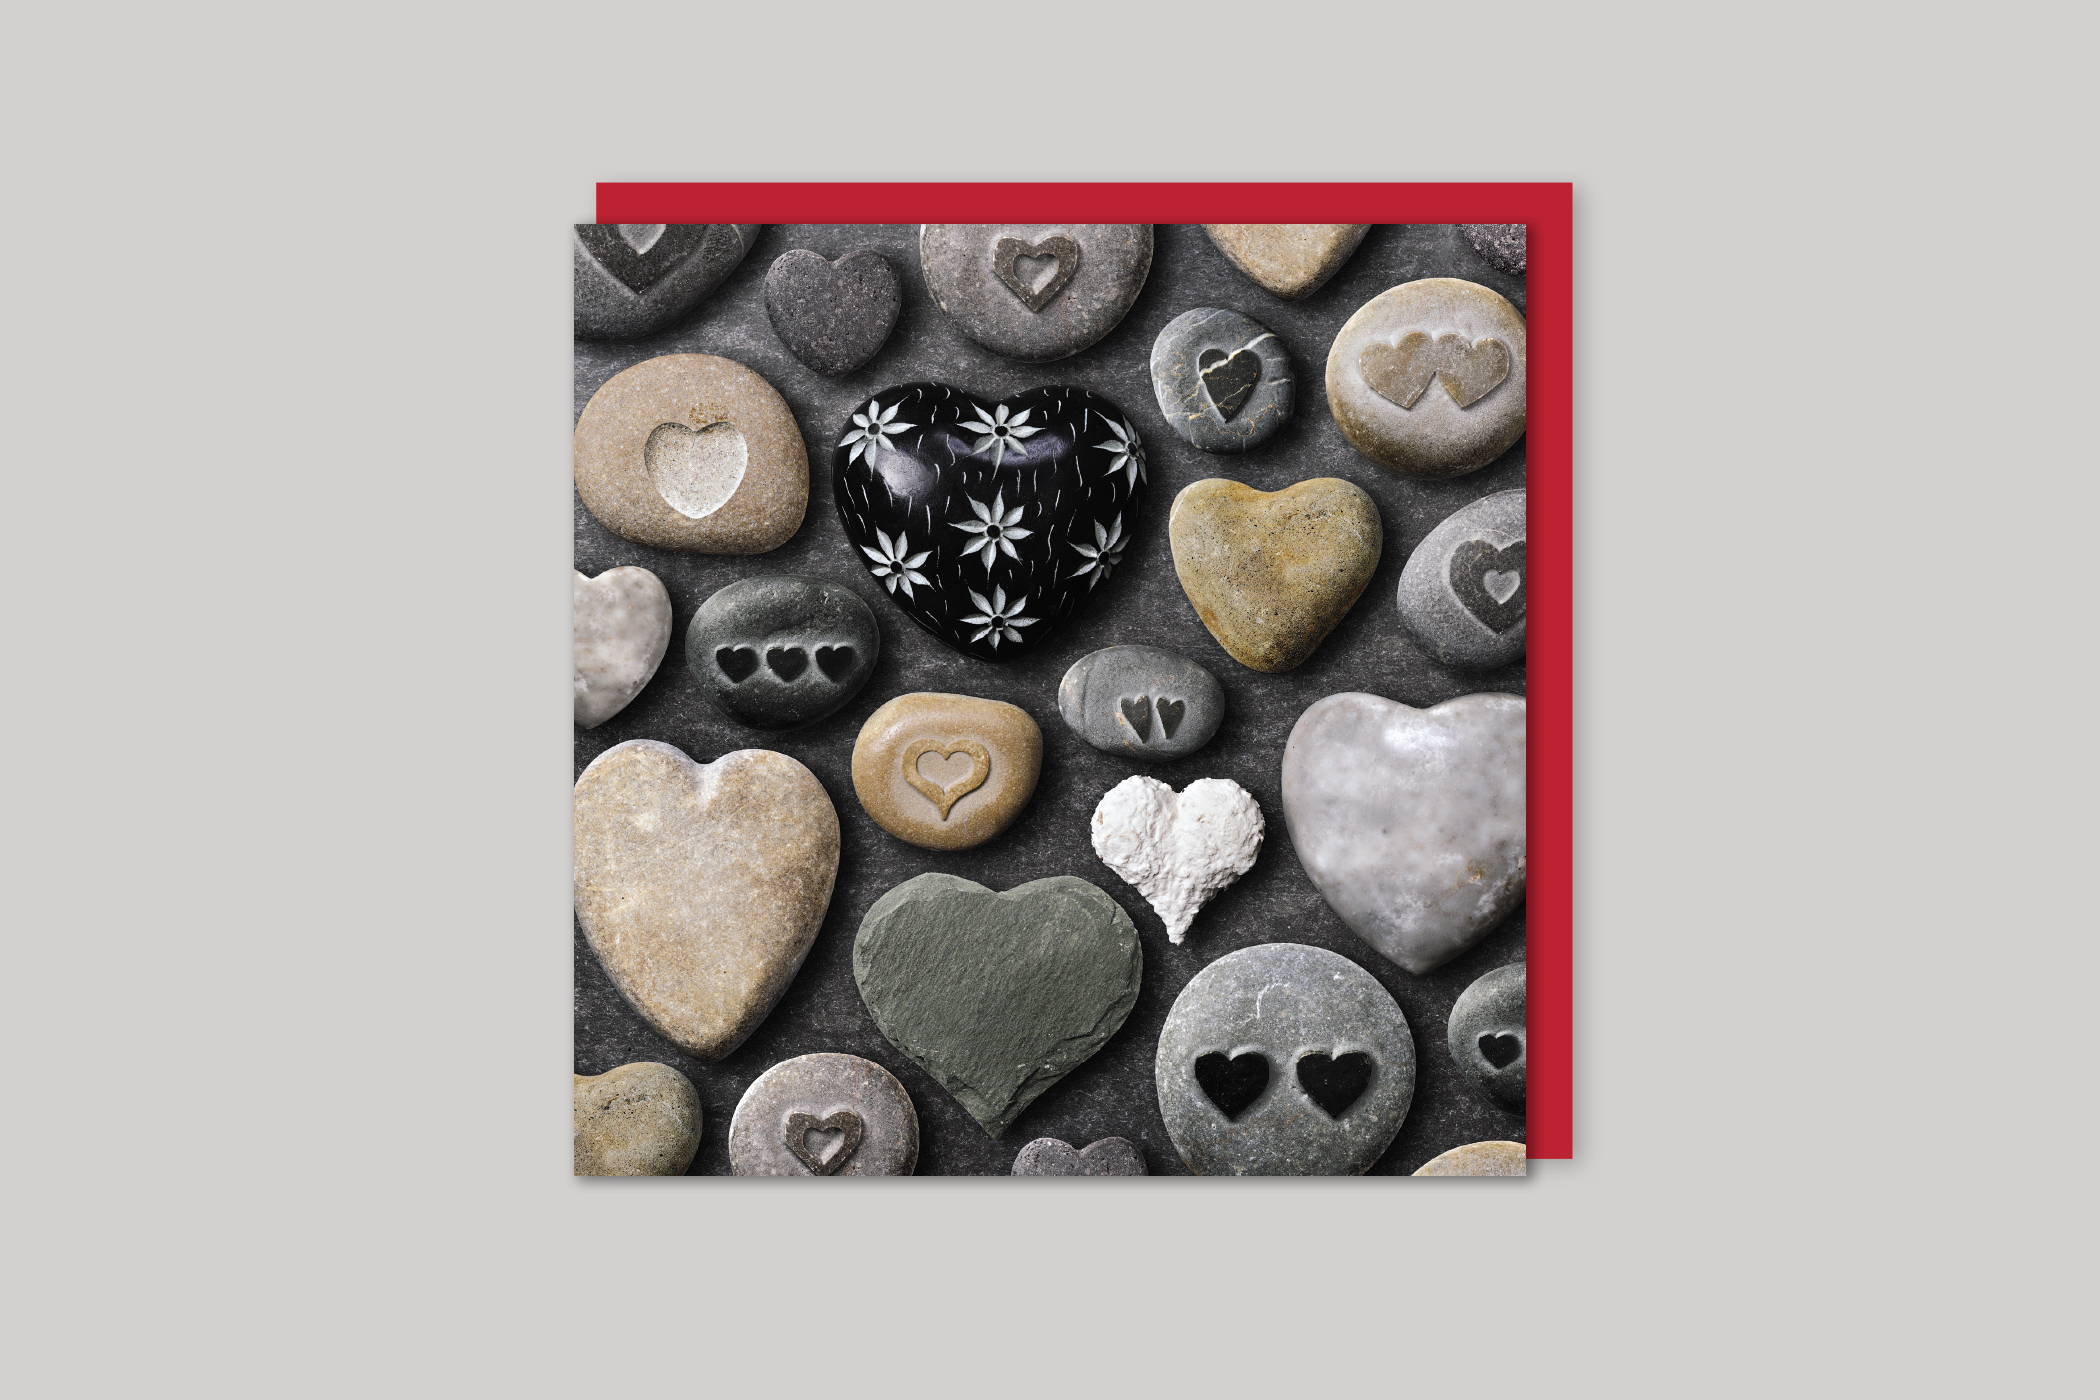 Love Rocks! from Exposure range of photographic cards by Icon, back page.